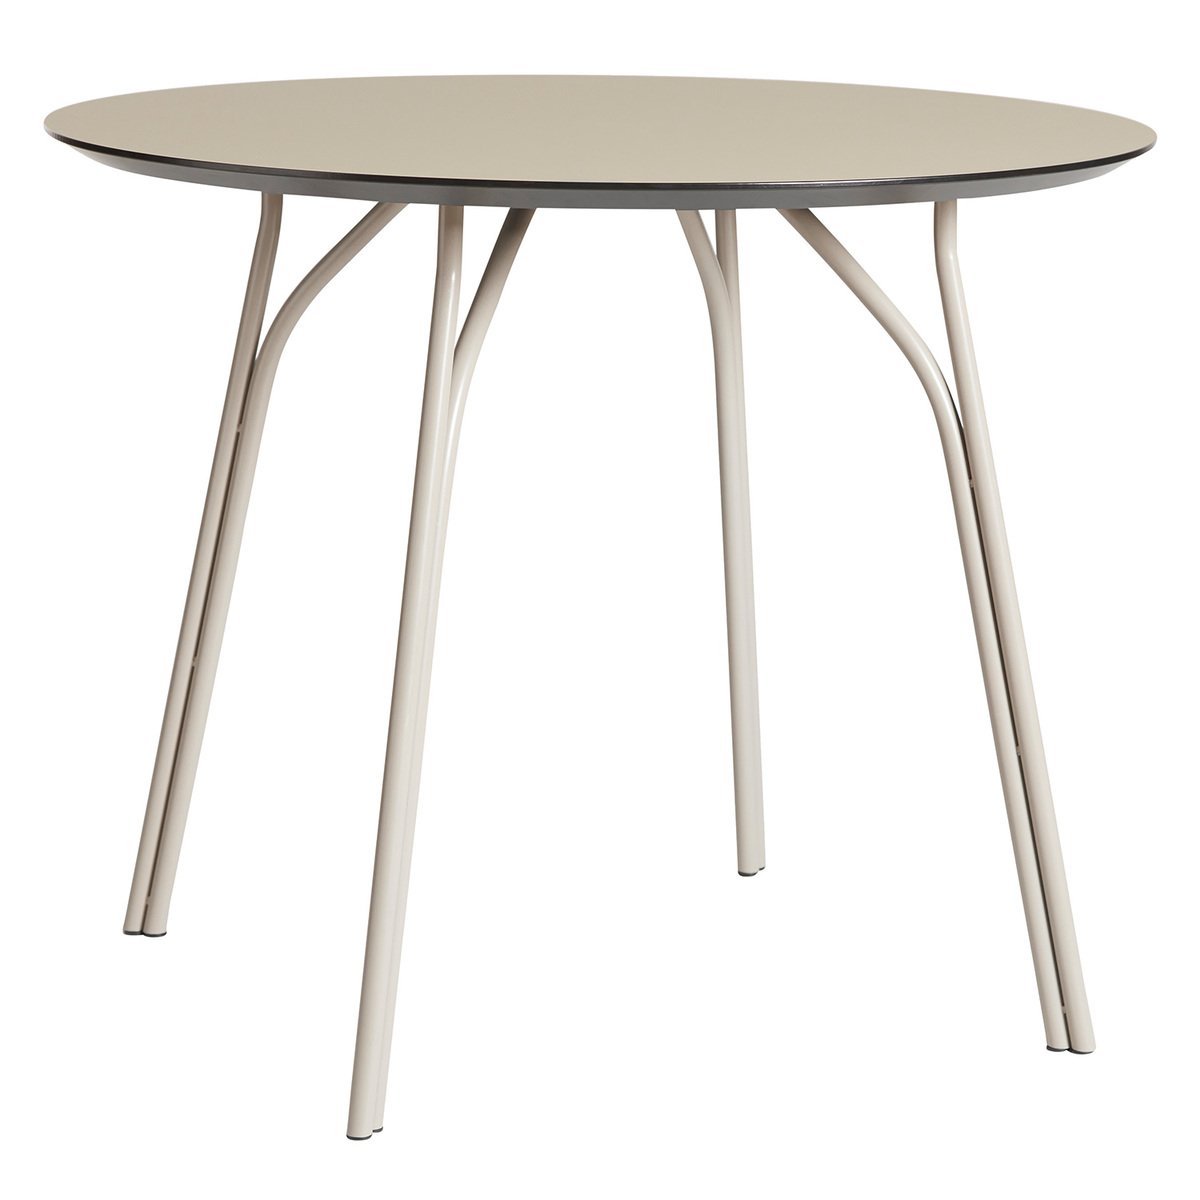 Woud Tree Dining Table Round 90 Cm, White Laminate Round Dining Table